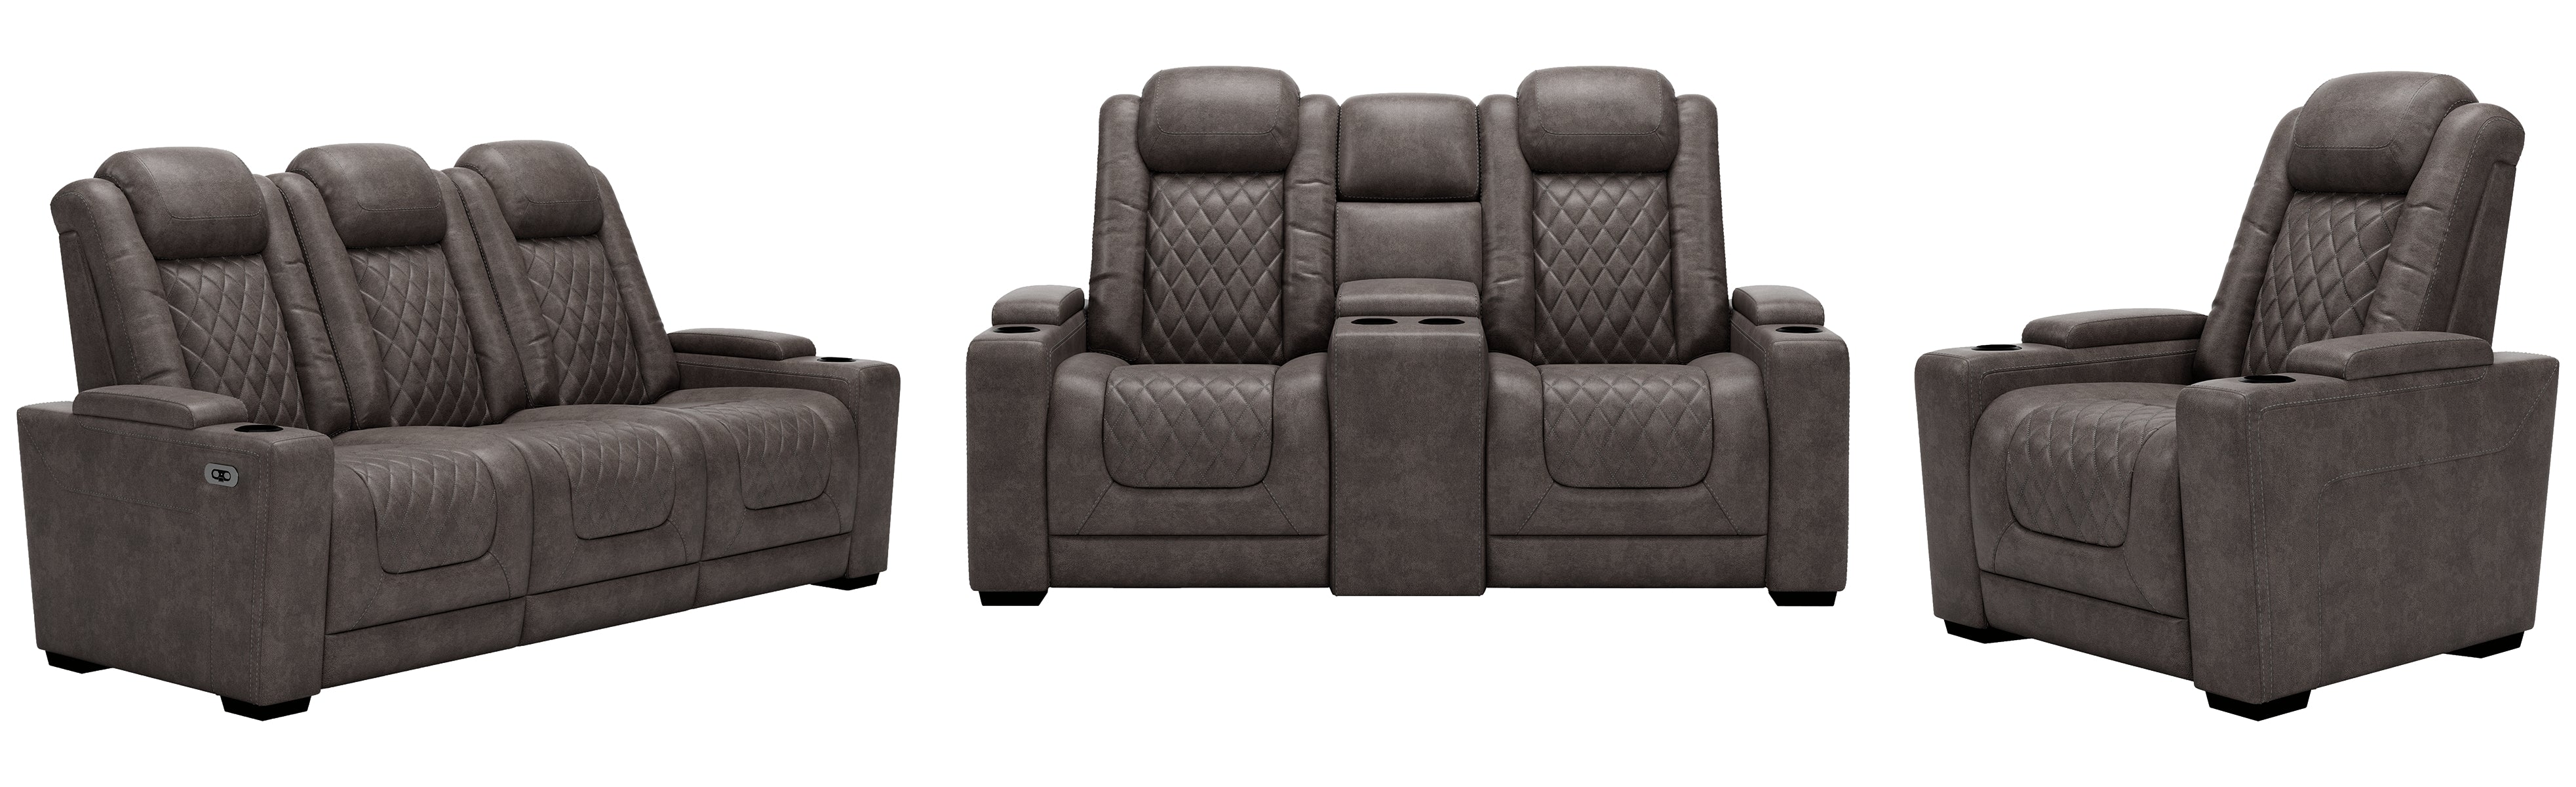 HyllMont Sofa, Loveseat and Recliner